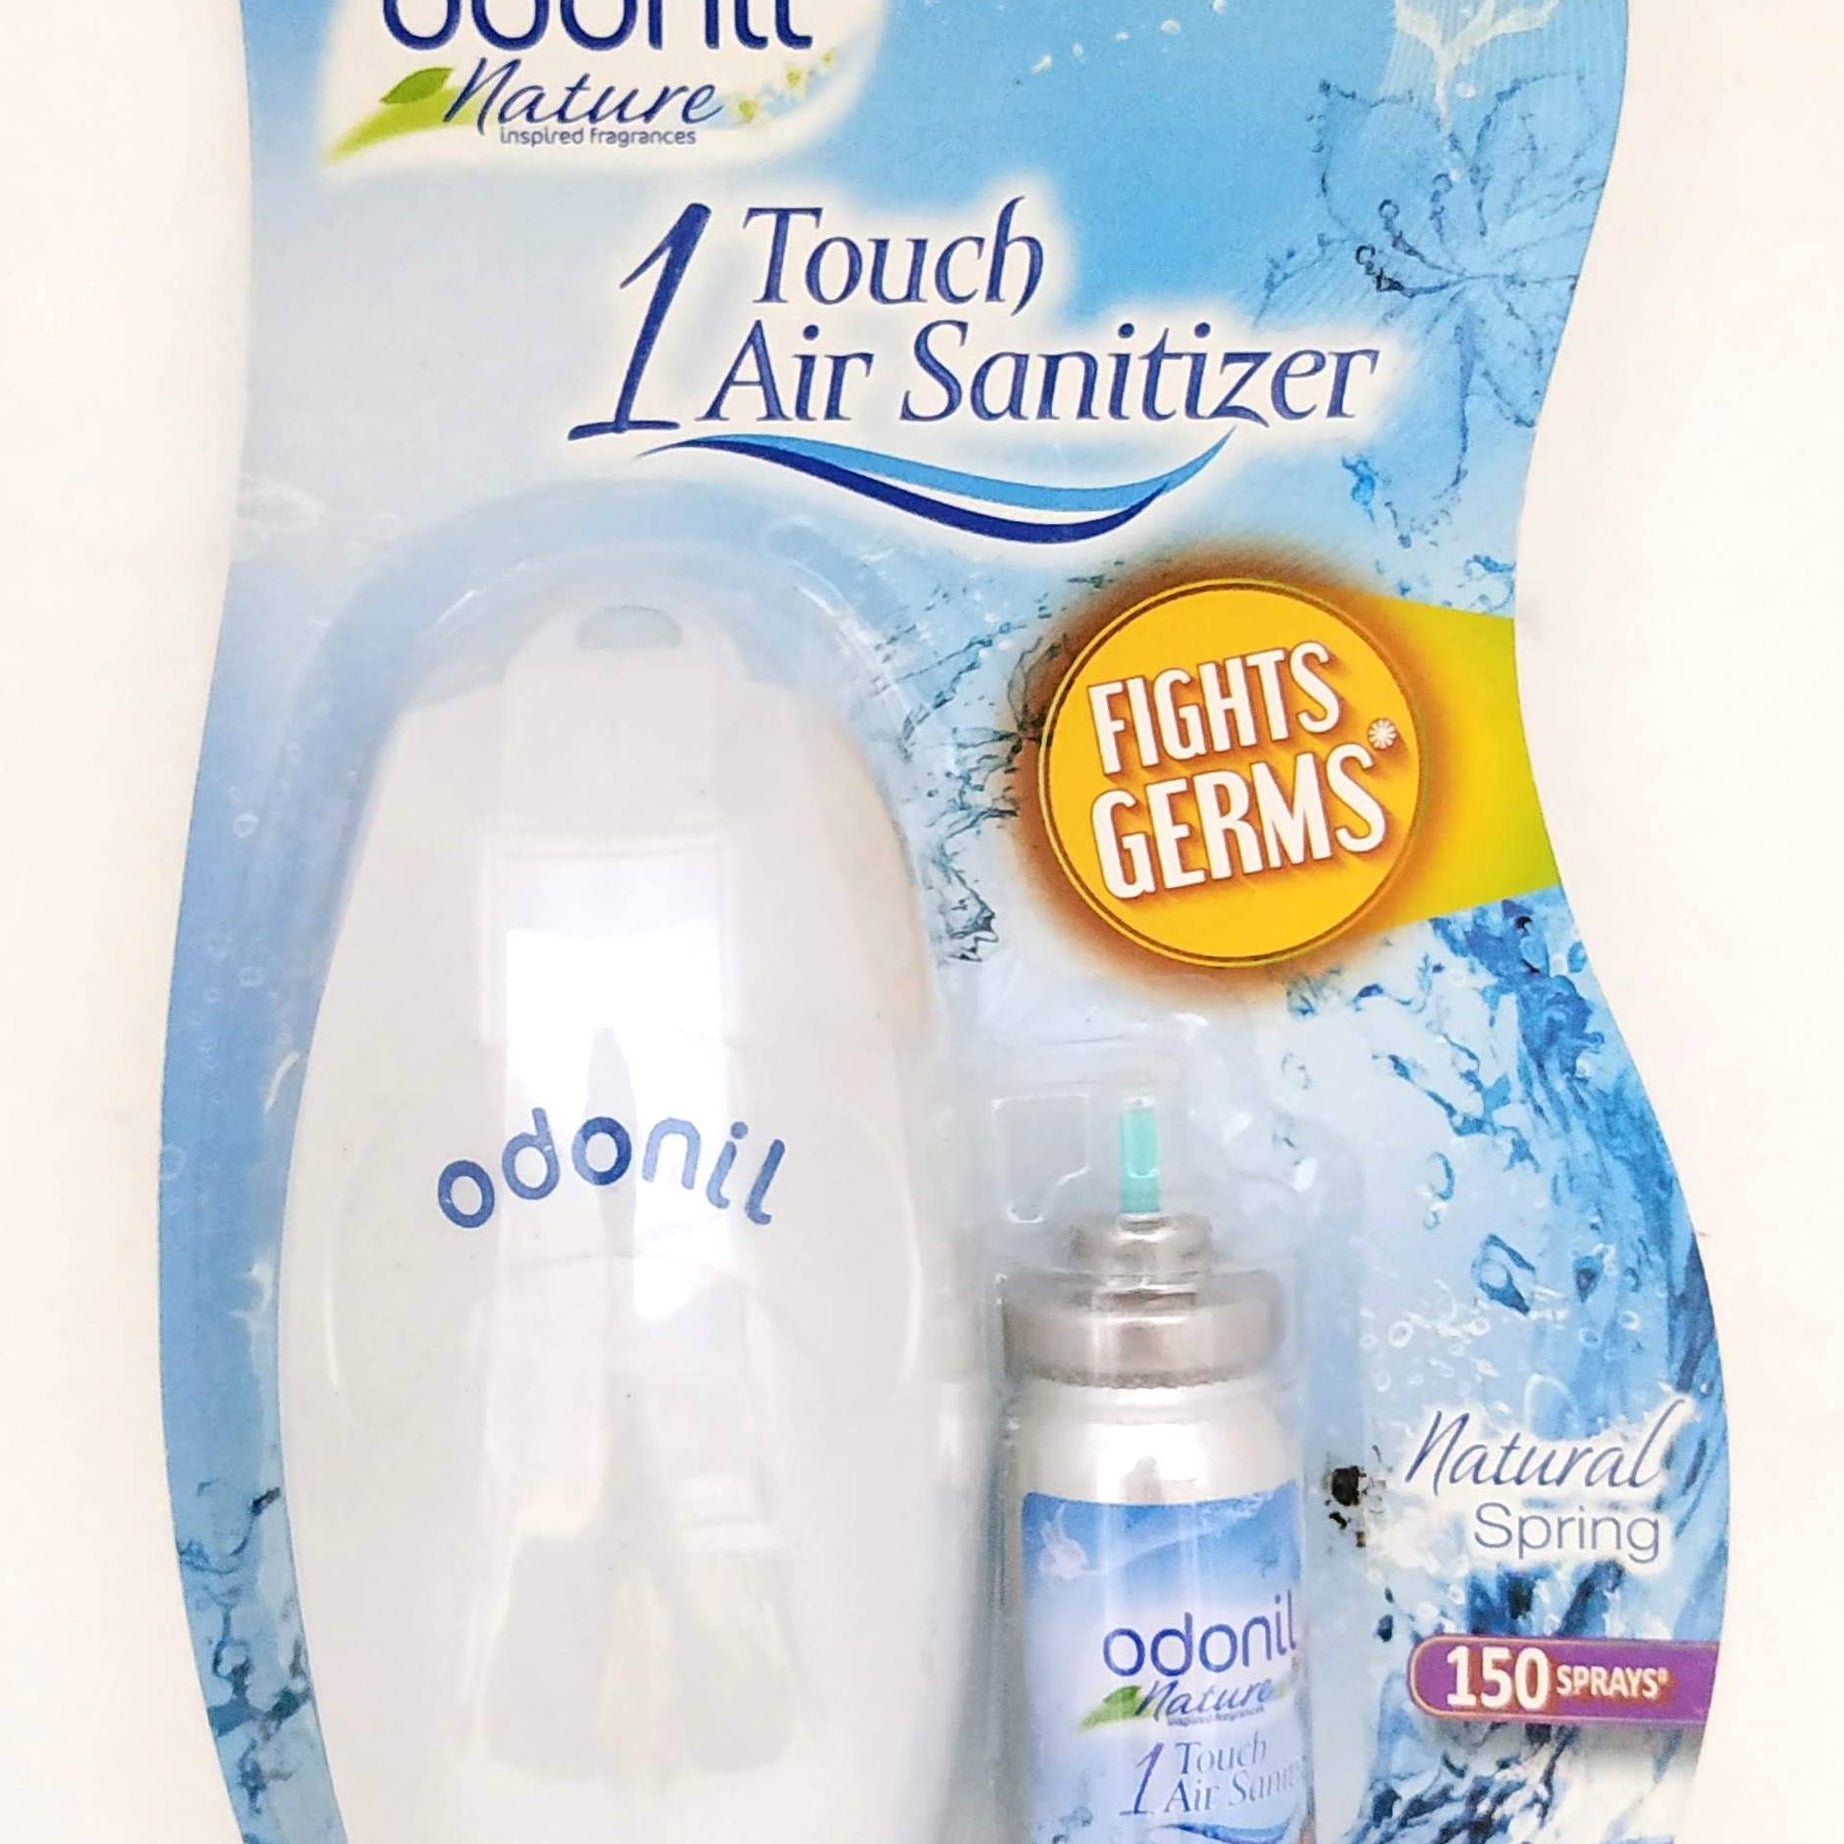 Shop Odonil One Touch Air Sanitizer - Natural Spring at price 120.00 from Dabur Online - Ayush Care